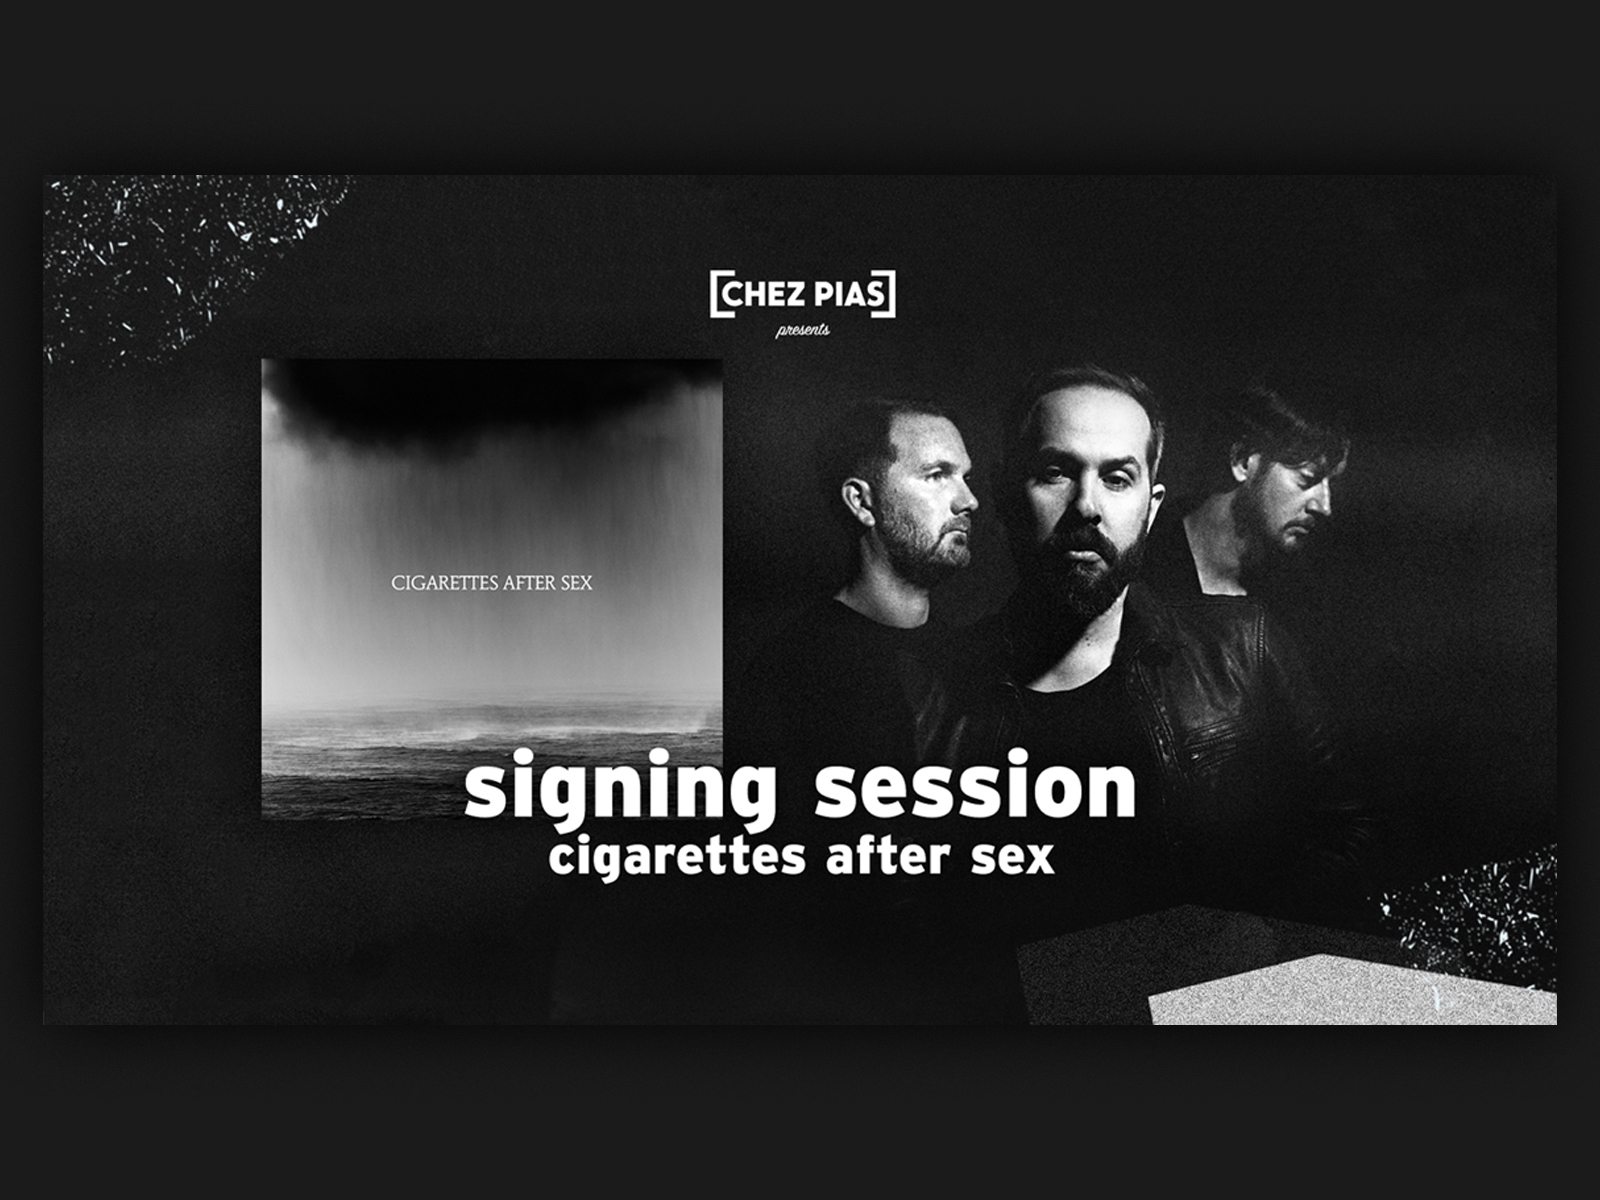 Cigarettes After Sex X Chez Pias Signing Session By Nico Lono On Dribbble